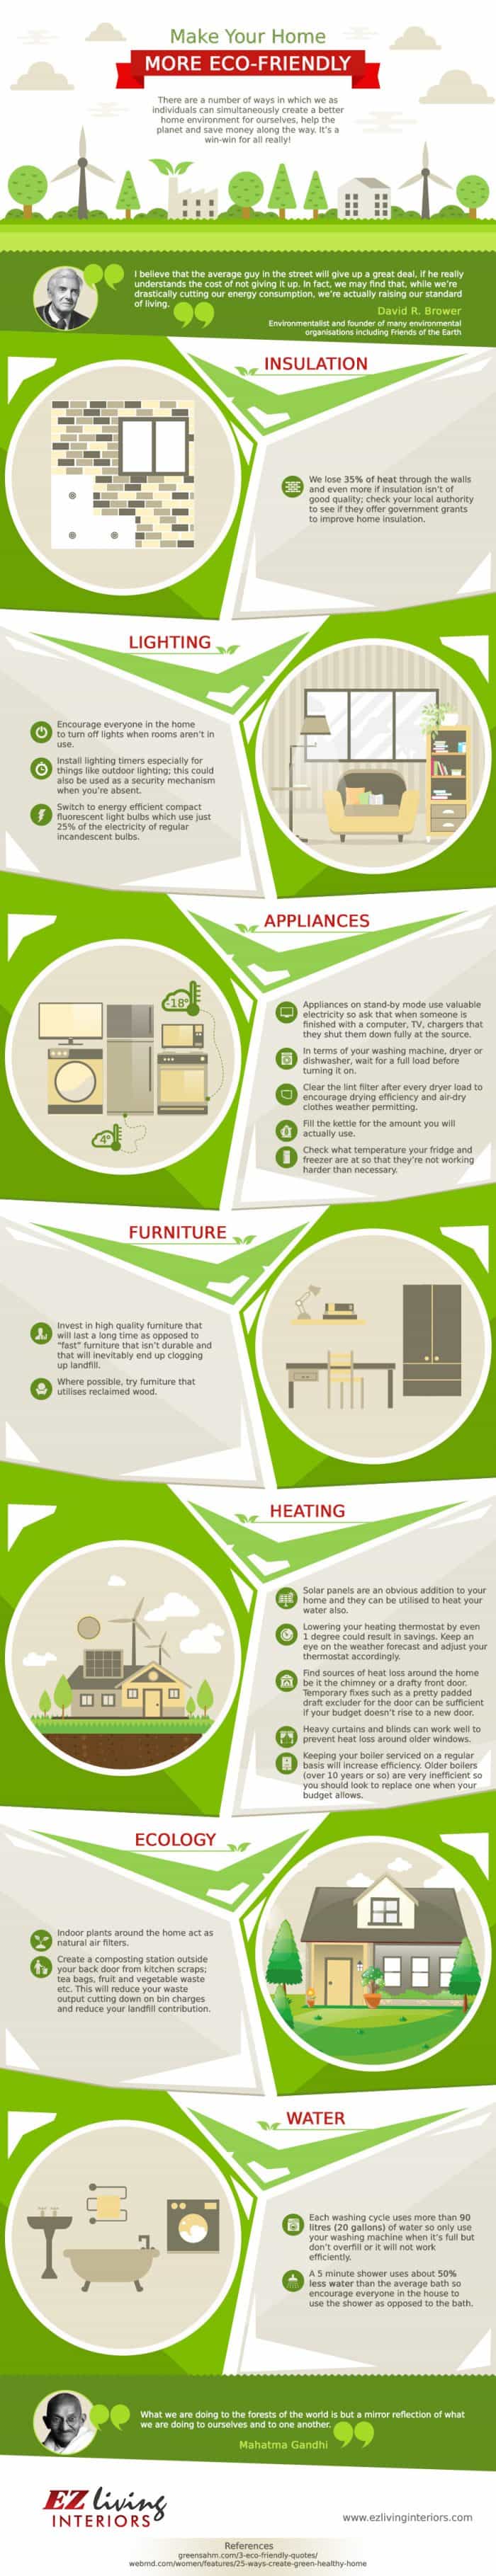 Make-Your-Home-More-Eco-Friendly-IE